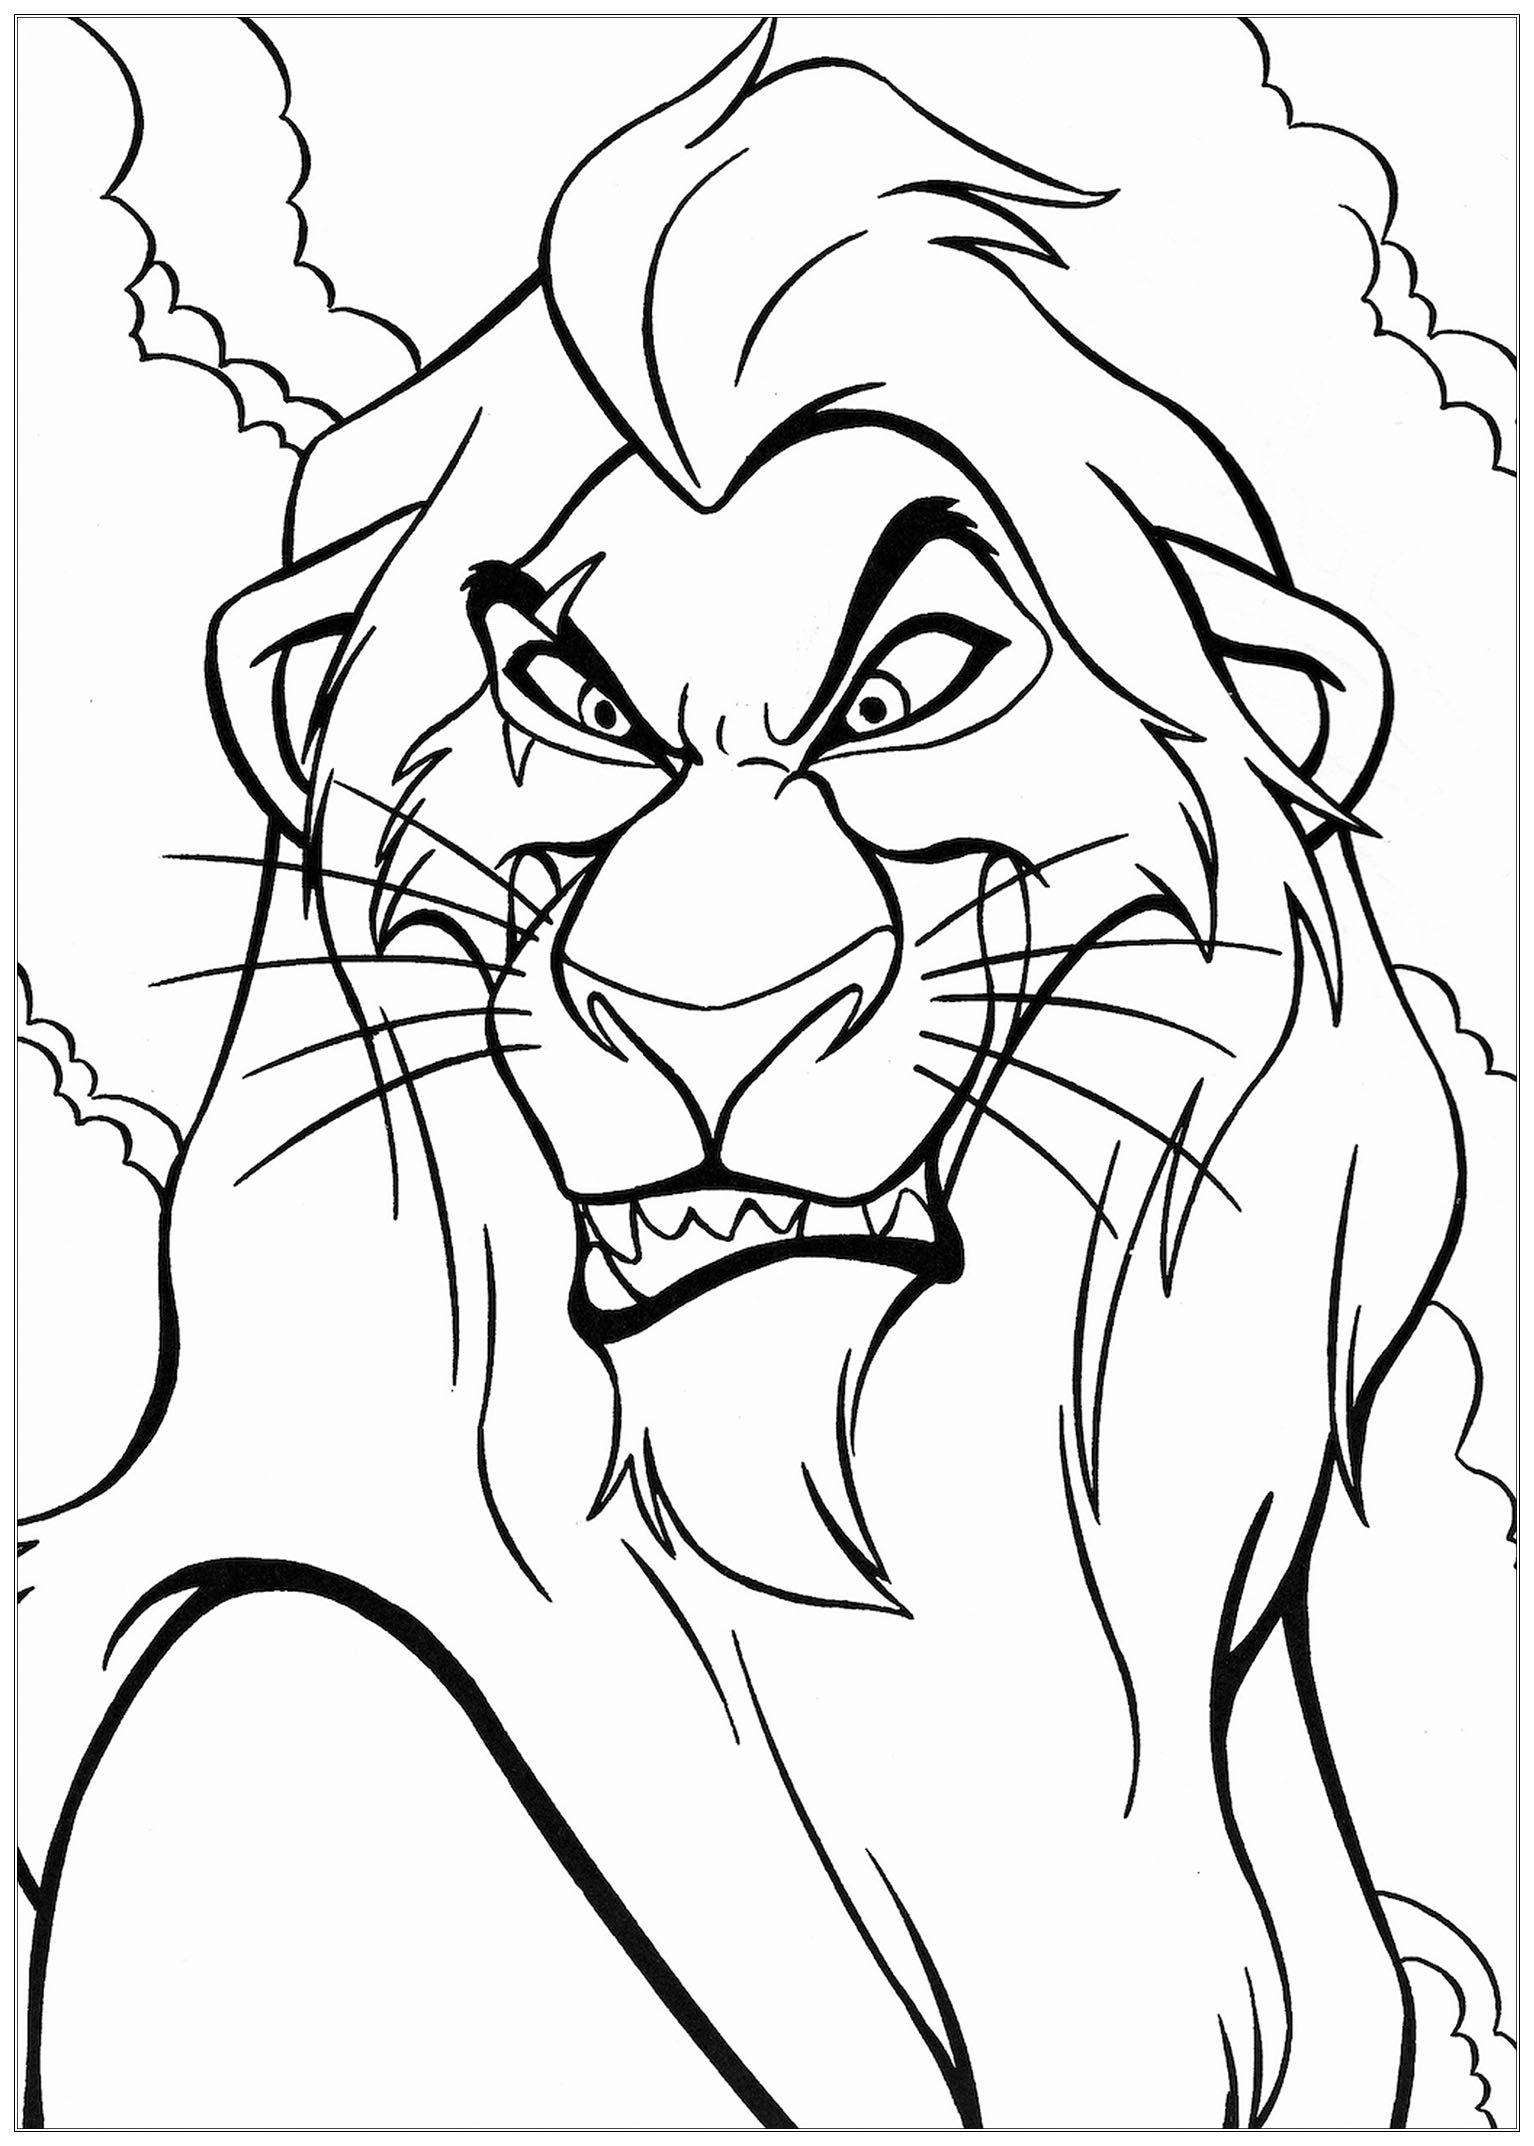 Scar - The Lion King Kids Coloring Pages